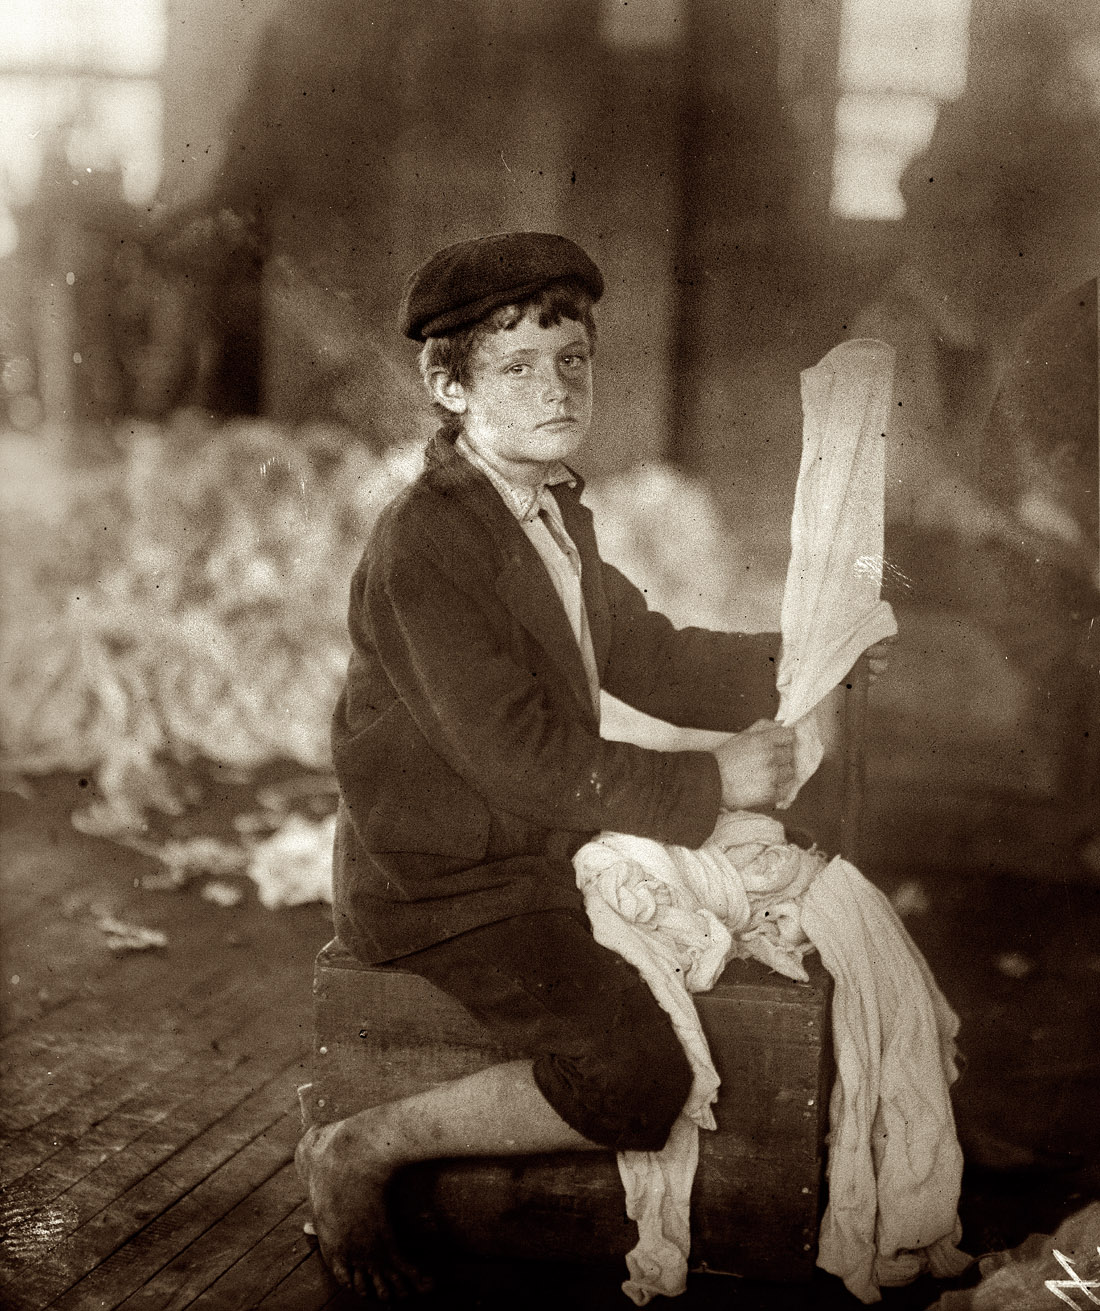 Noon, April 10, 1913. Cherokee Hosiery Mill in Rome, Georgia. "The youngest are turners and loopers. Some of these appear to be as young as 8 and 9 years." Photograph and caption by Lewis Wickes Hine. View full size.